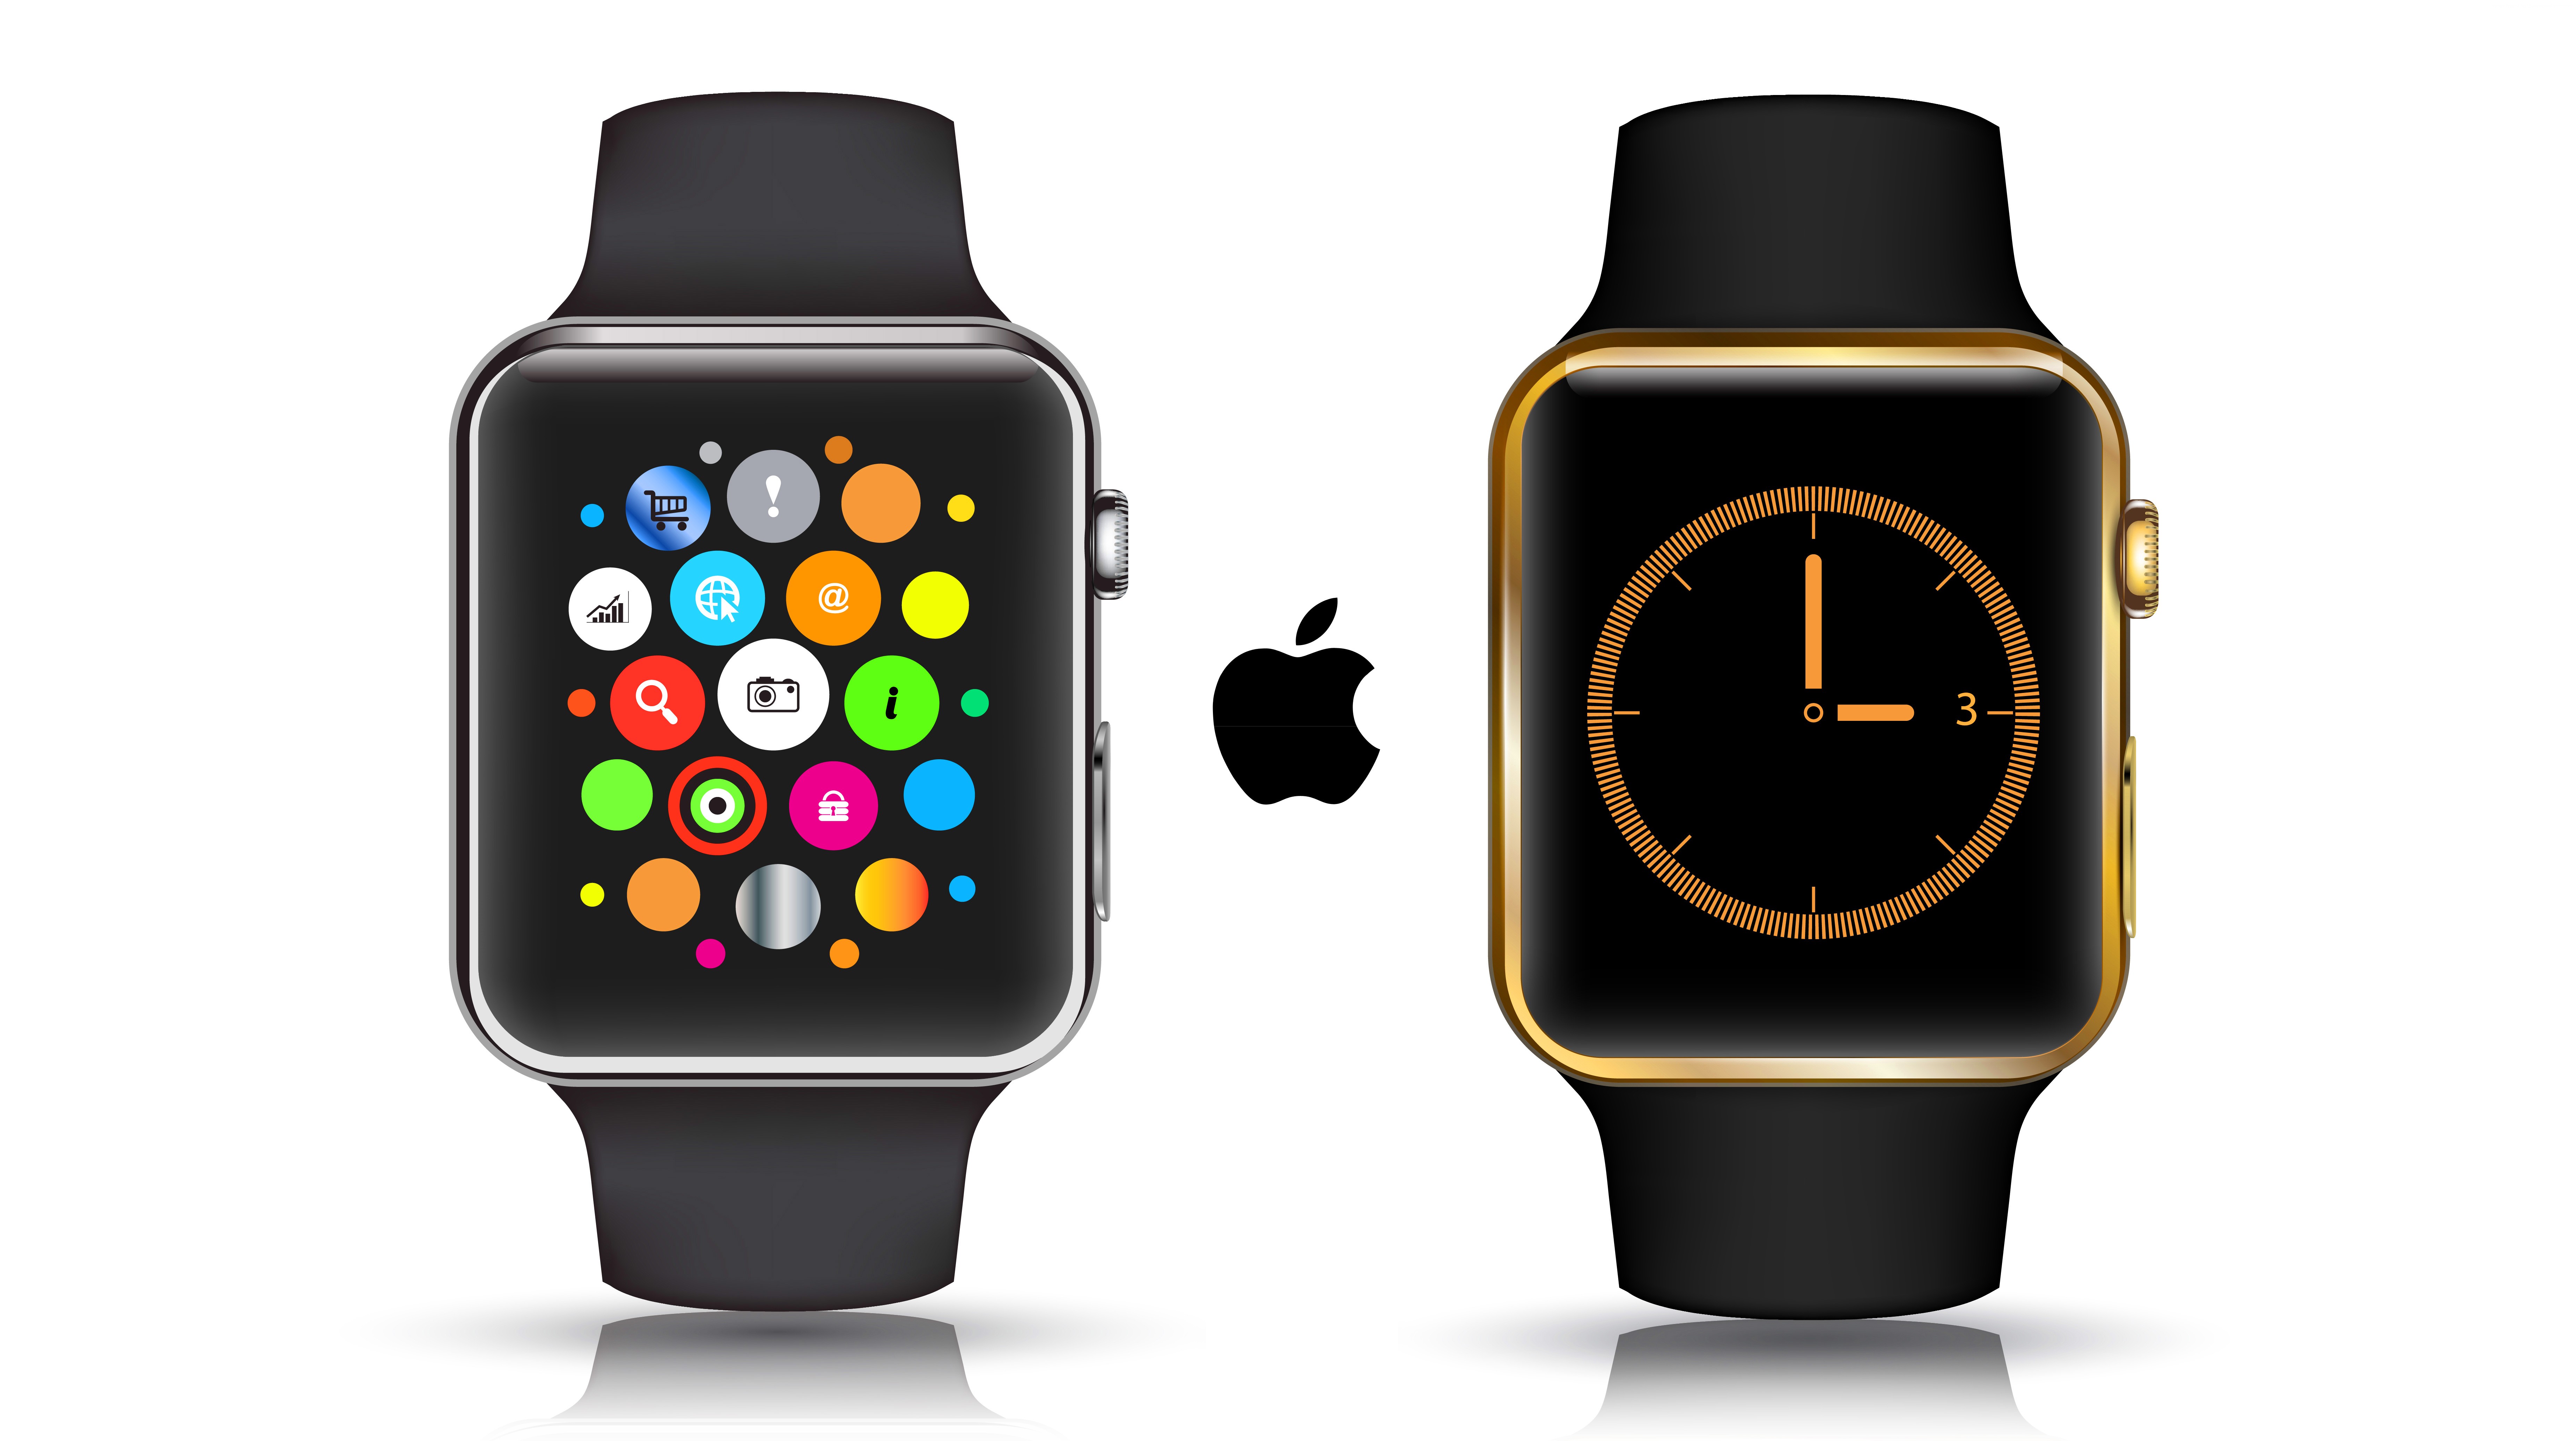 #interface, #review, #Apple Watch, #Real Futuristic Gadgets